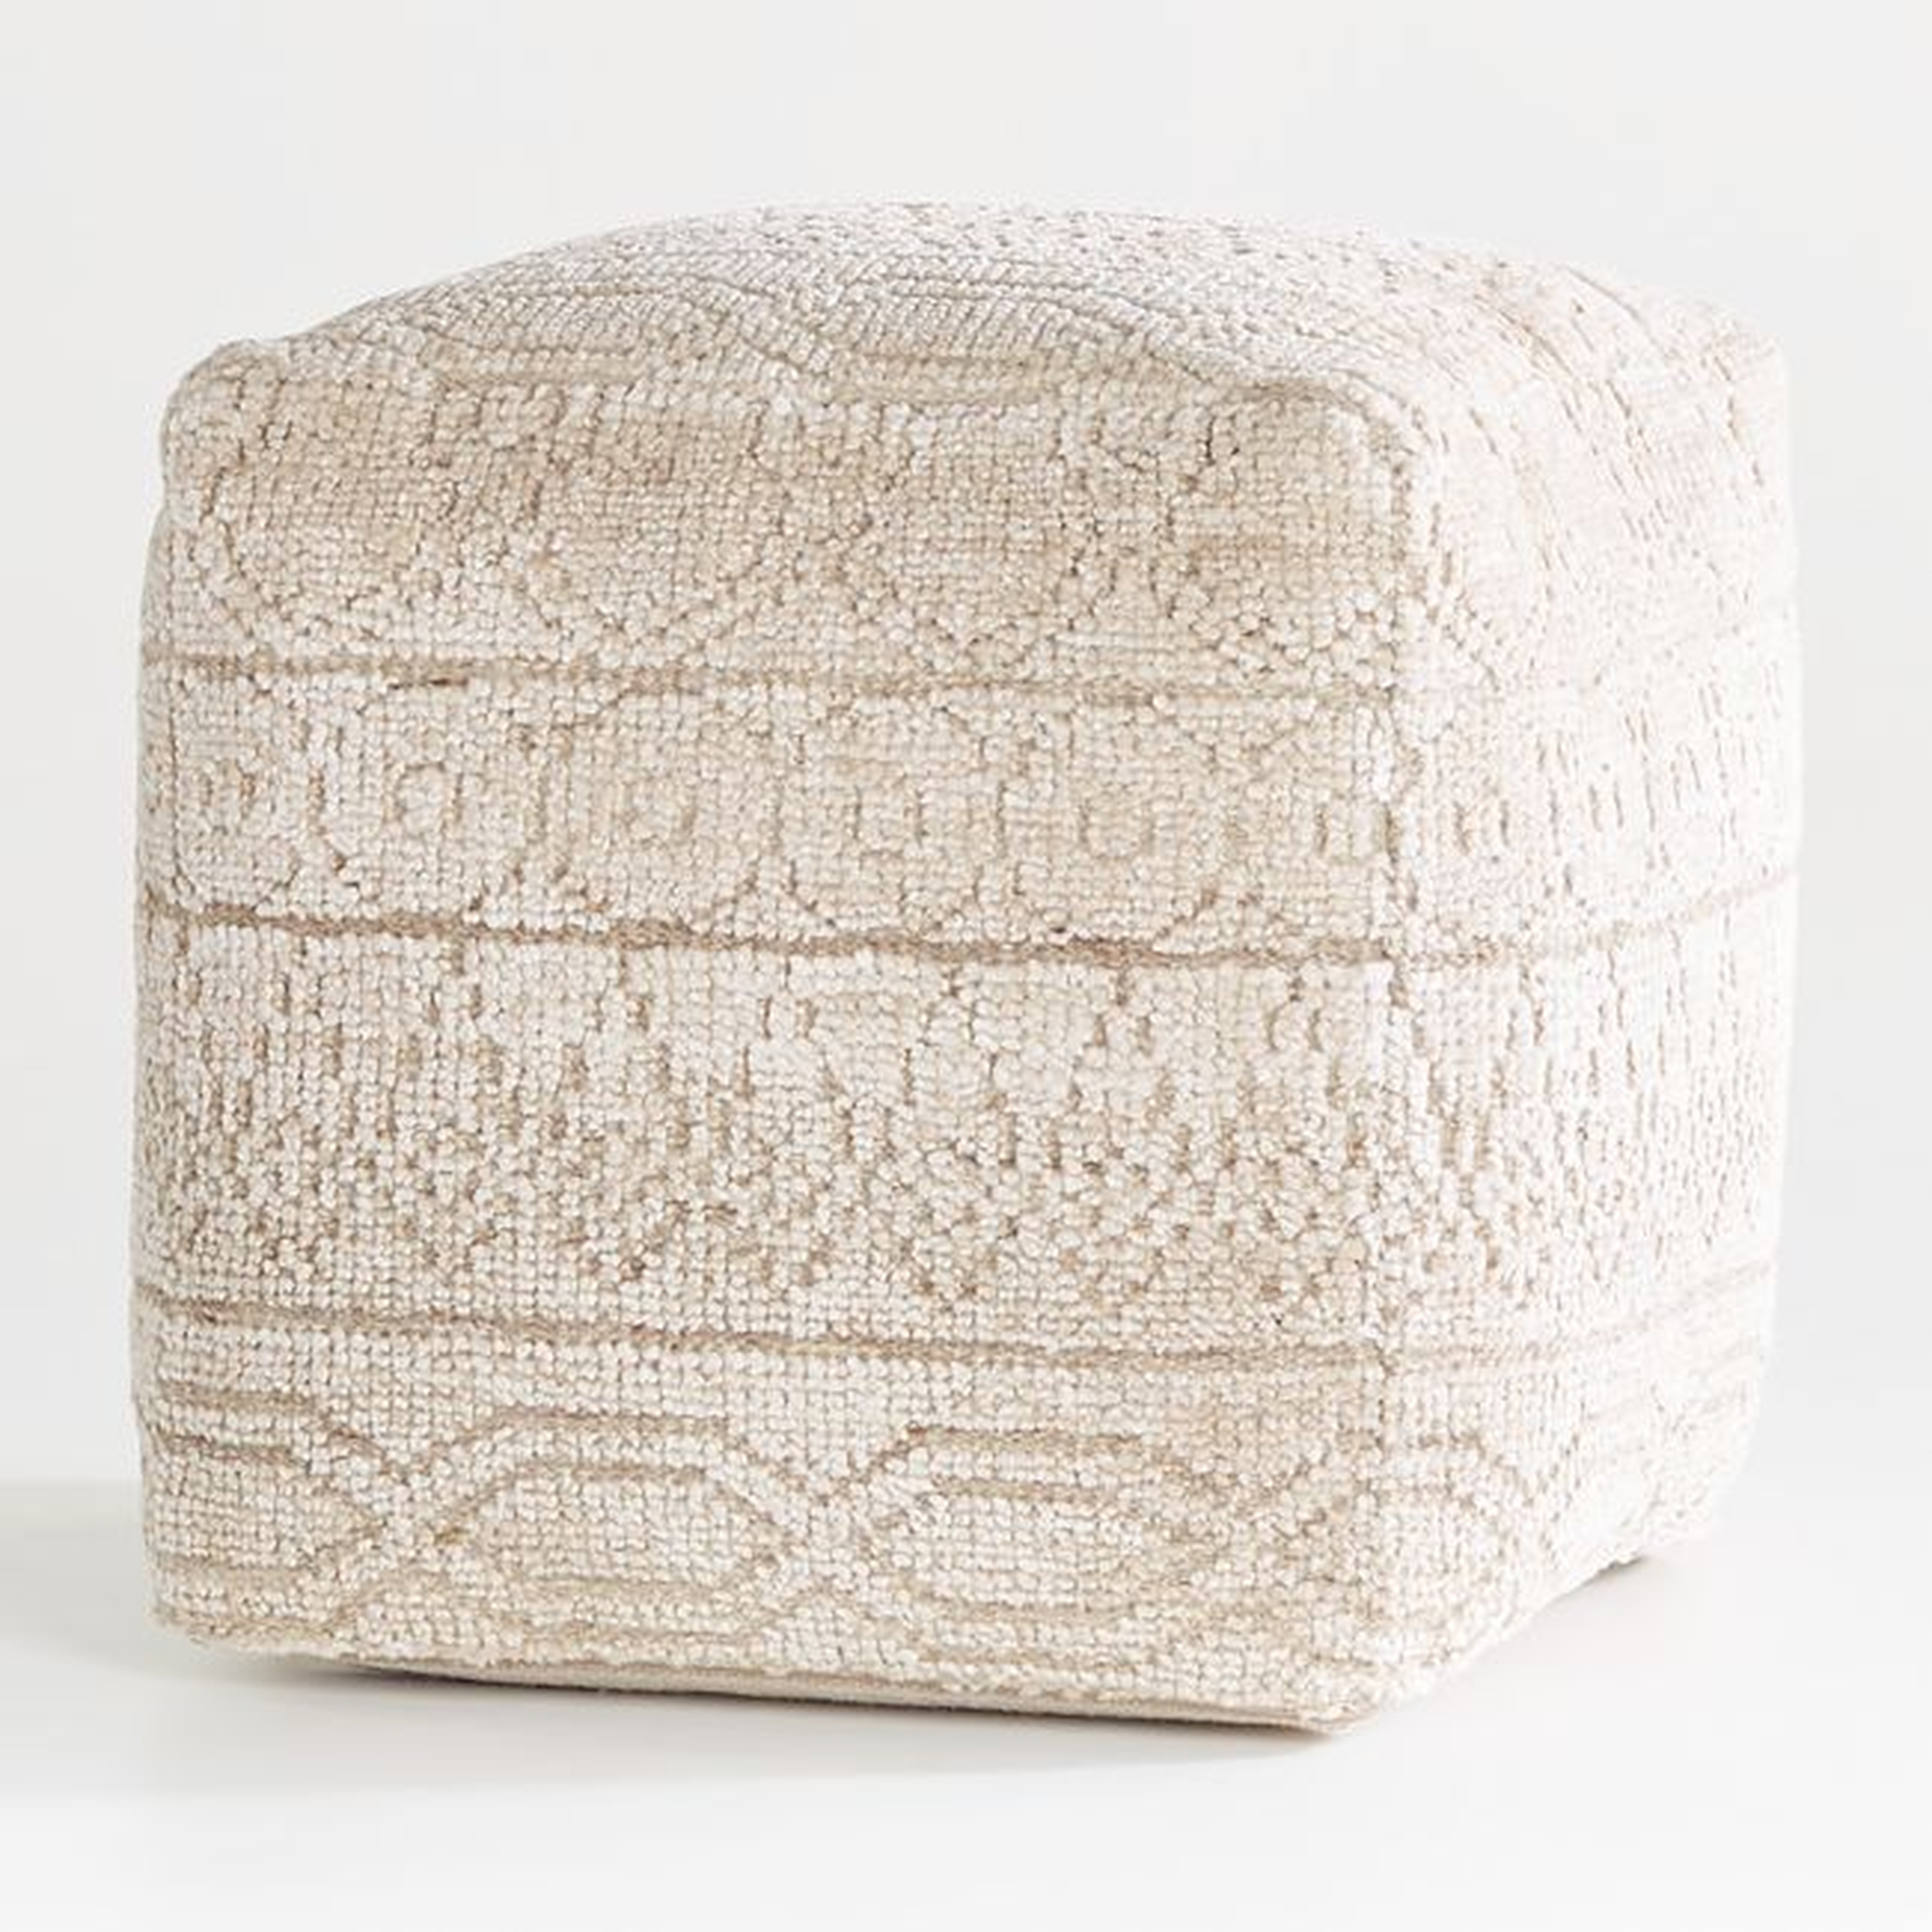 Lennon Patterned Pouf 18" - Crate and Barrel